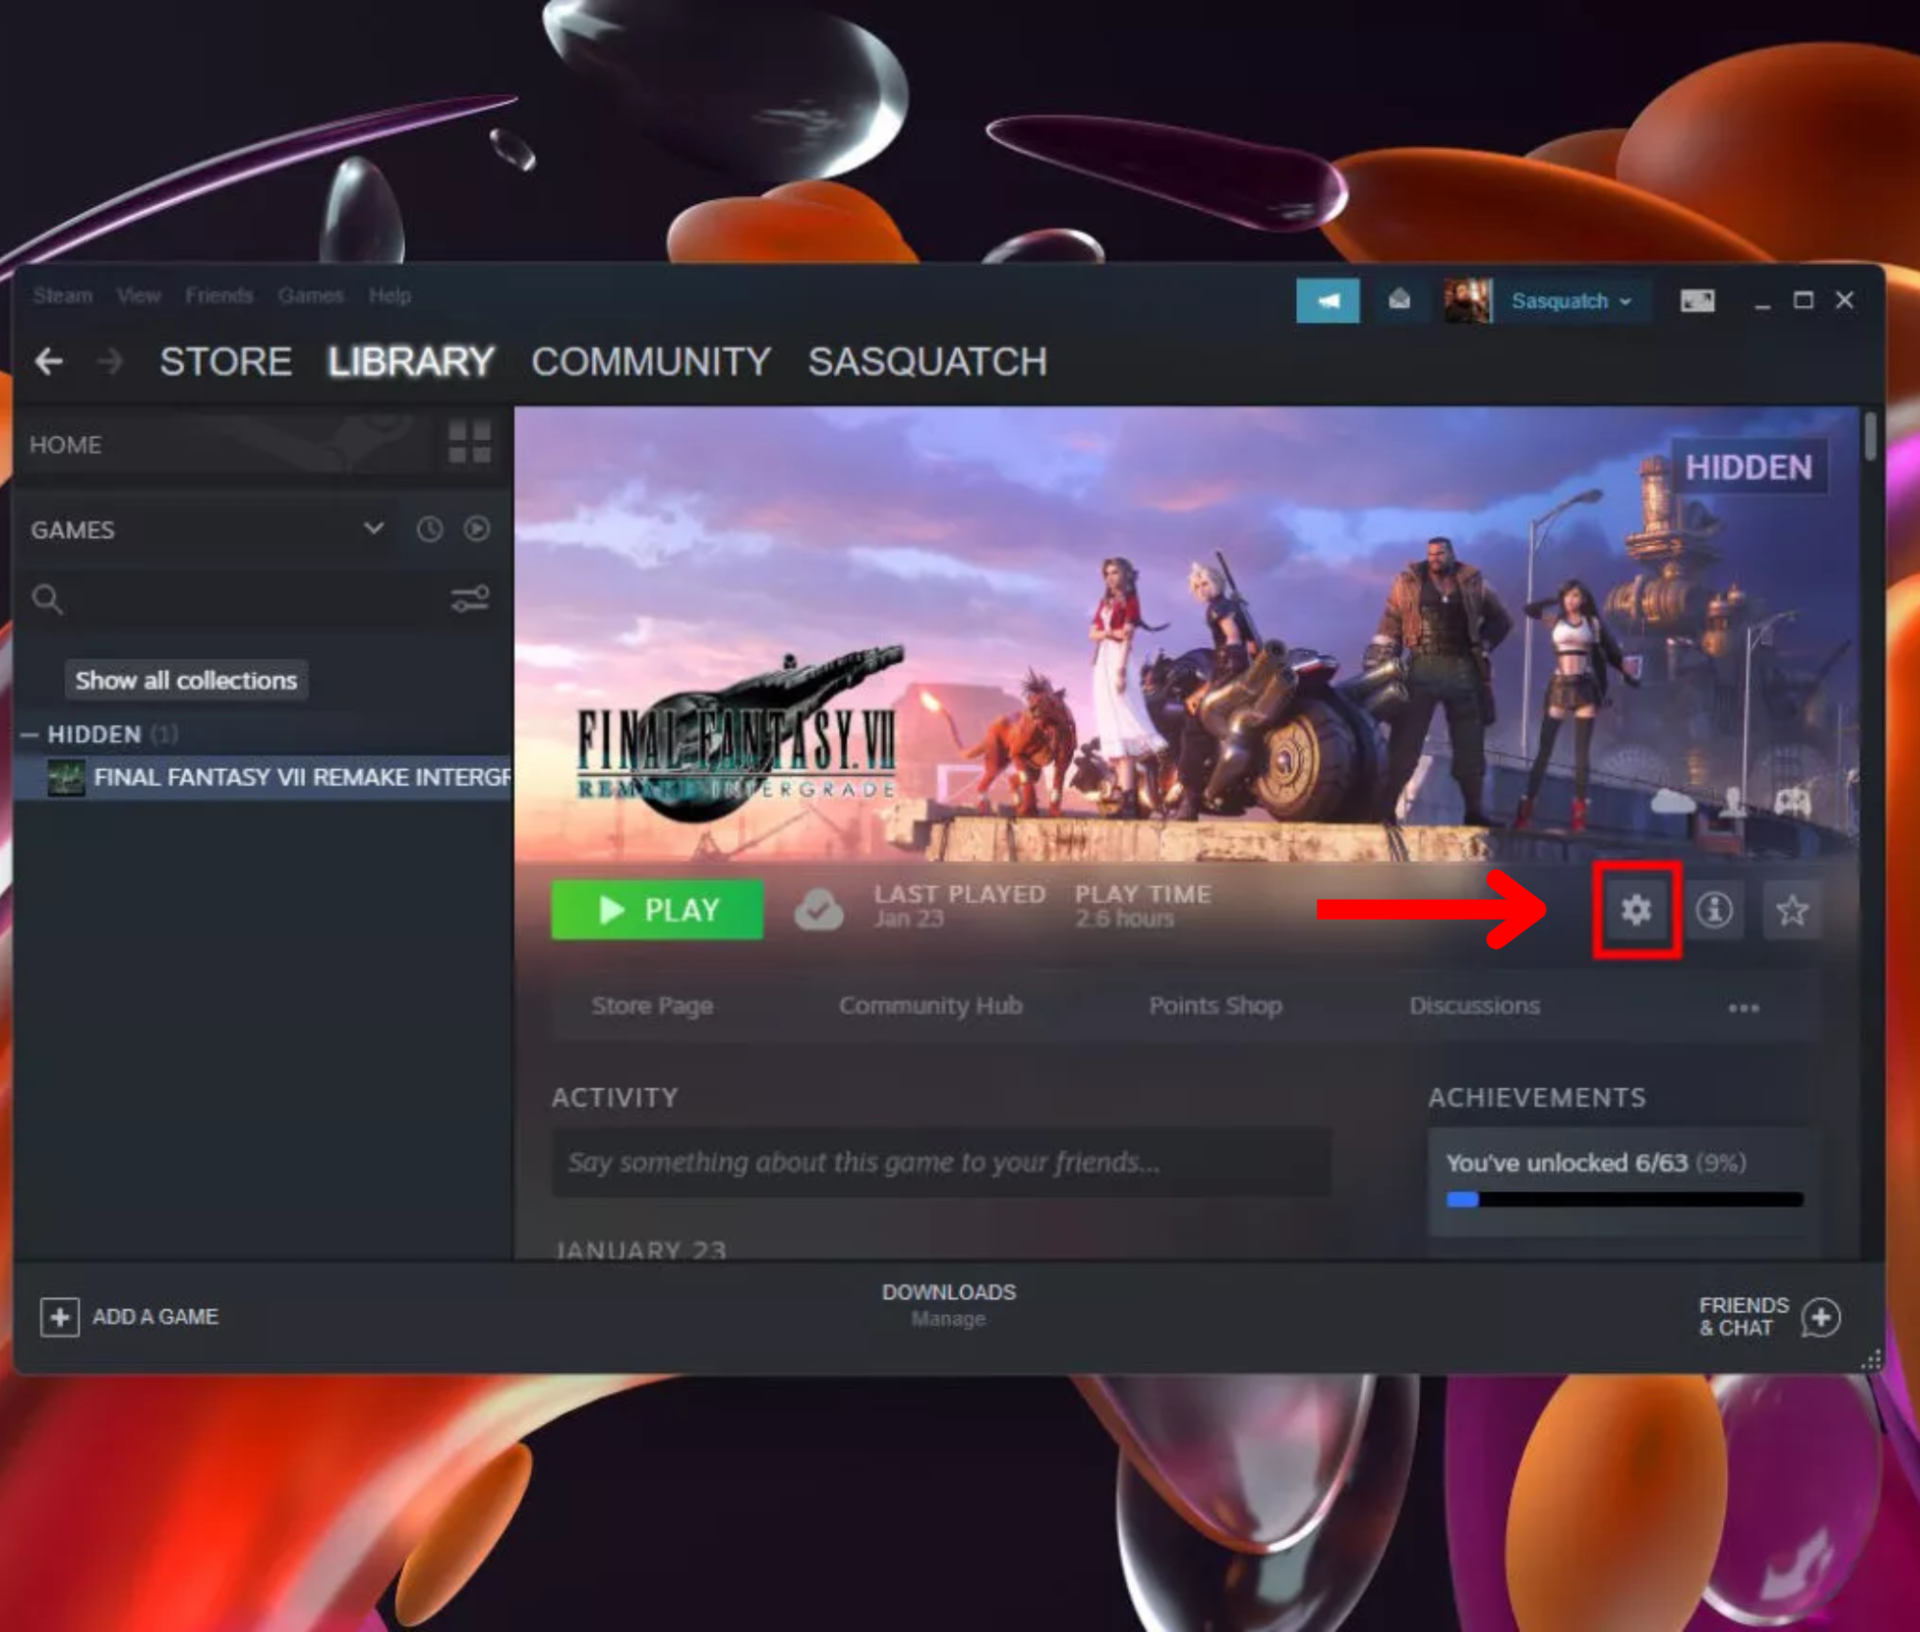 Steam might let you hide those embarrassing games in your profile soon